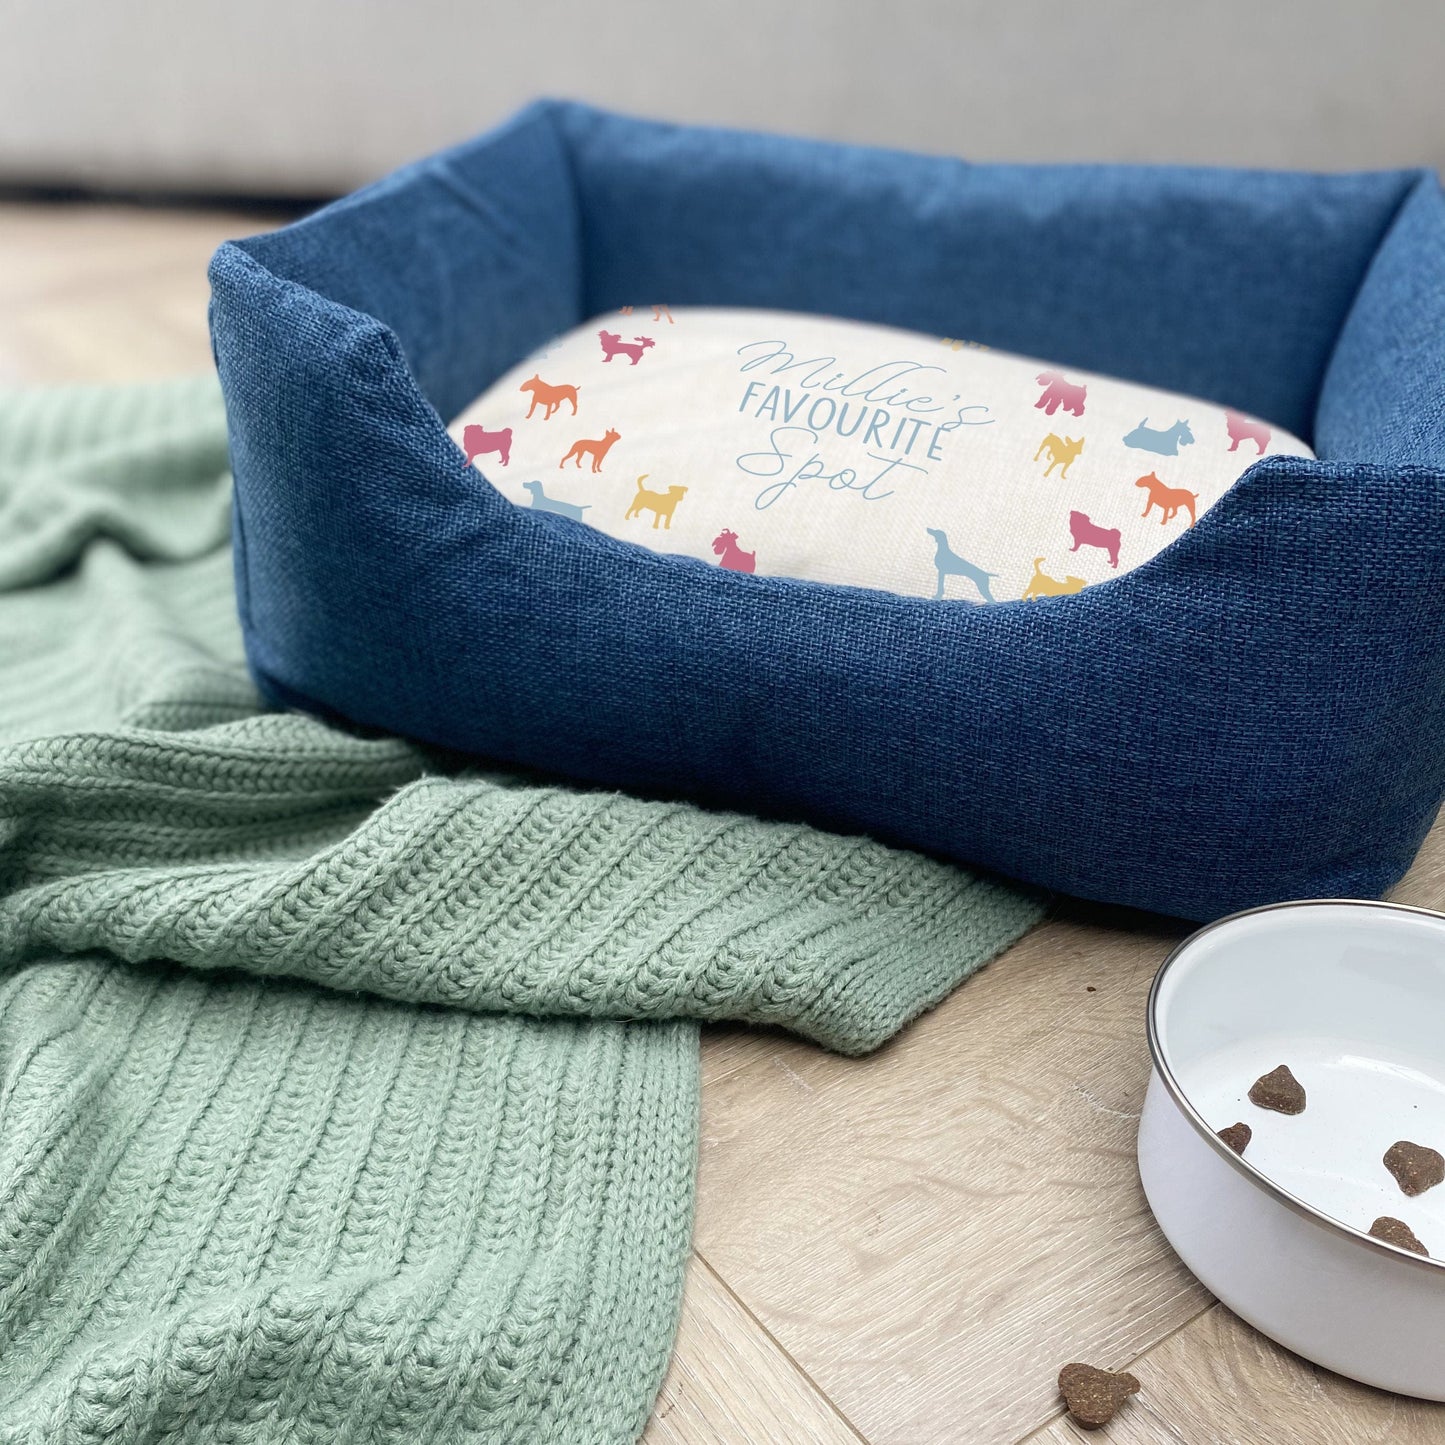 Personalised Favourite Spot Dog Bed